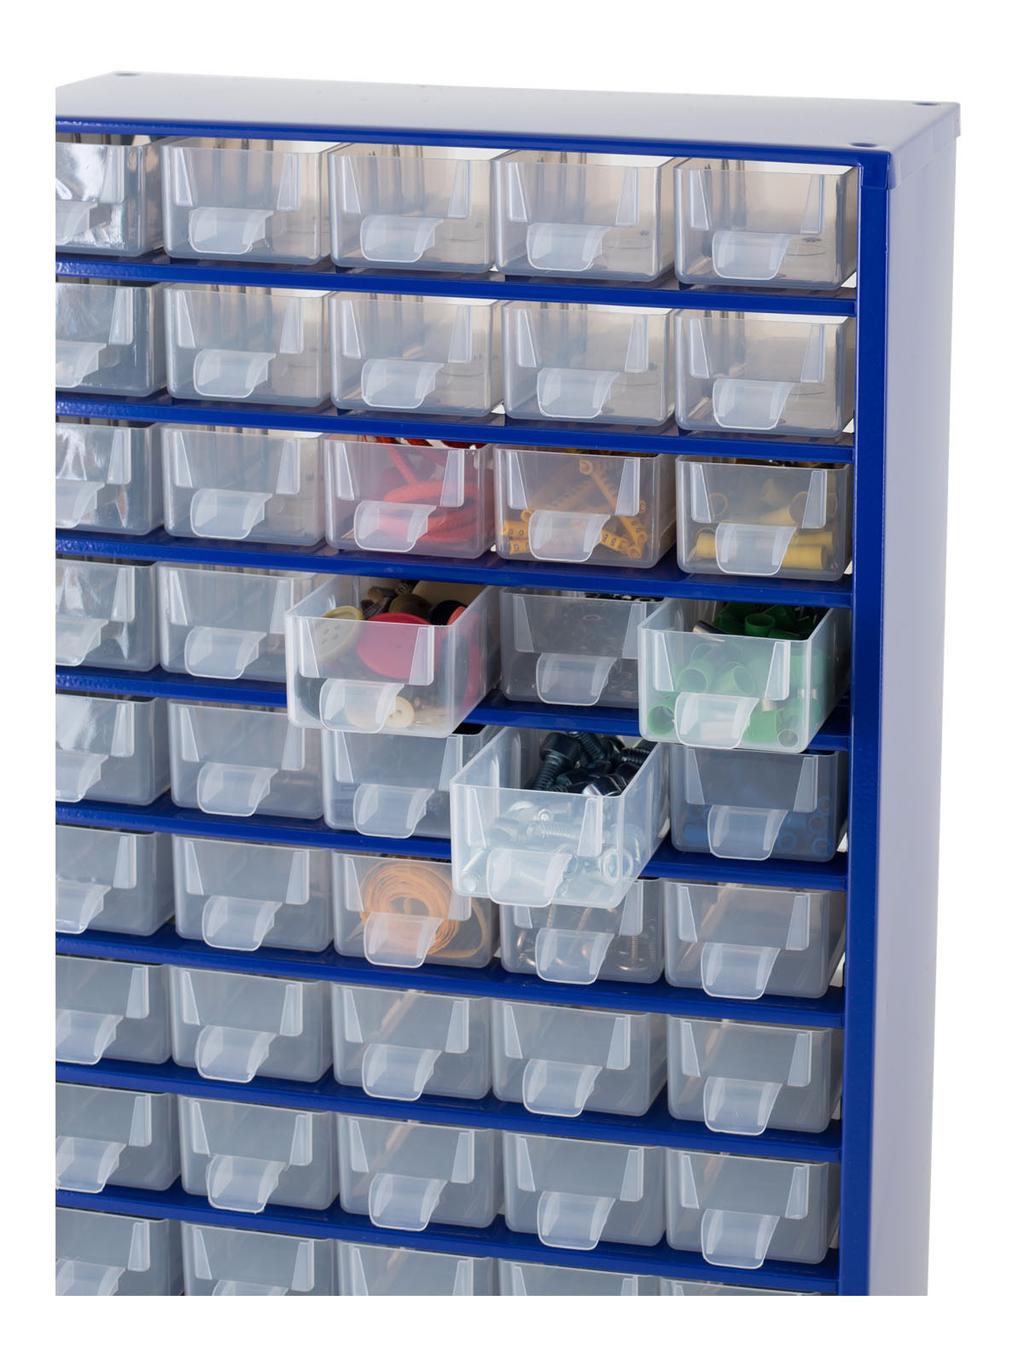 Drawer Steel Storage raft abinet - Small Parts Organizers Metal storage cabinets with plastic drawers are ideal for organized storage of small objects and parts.